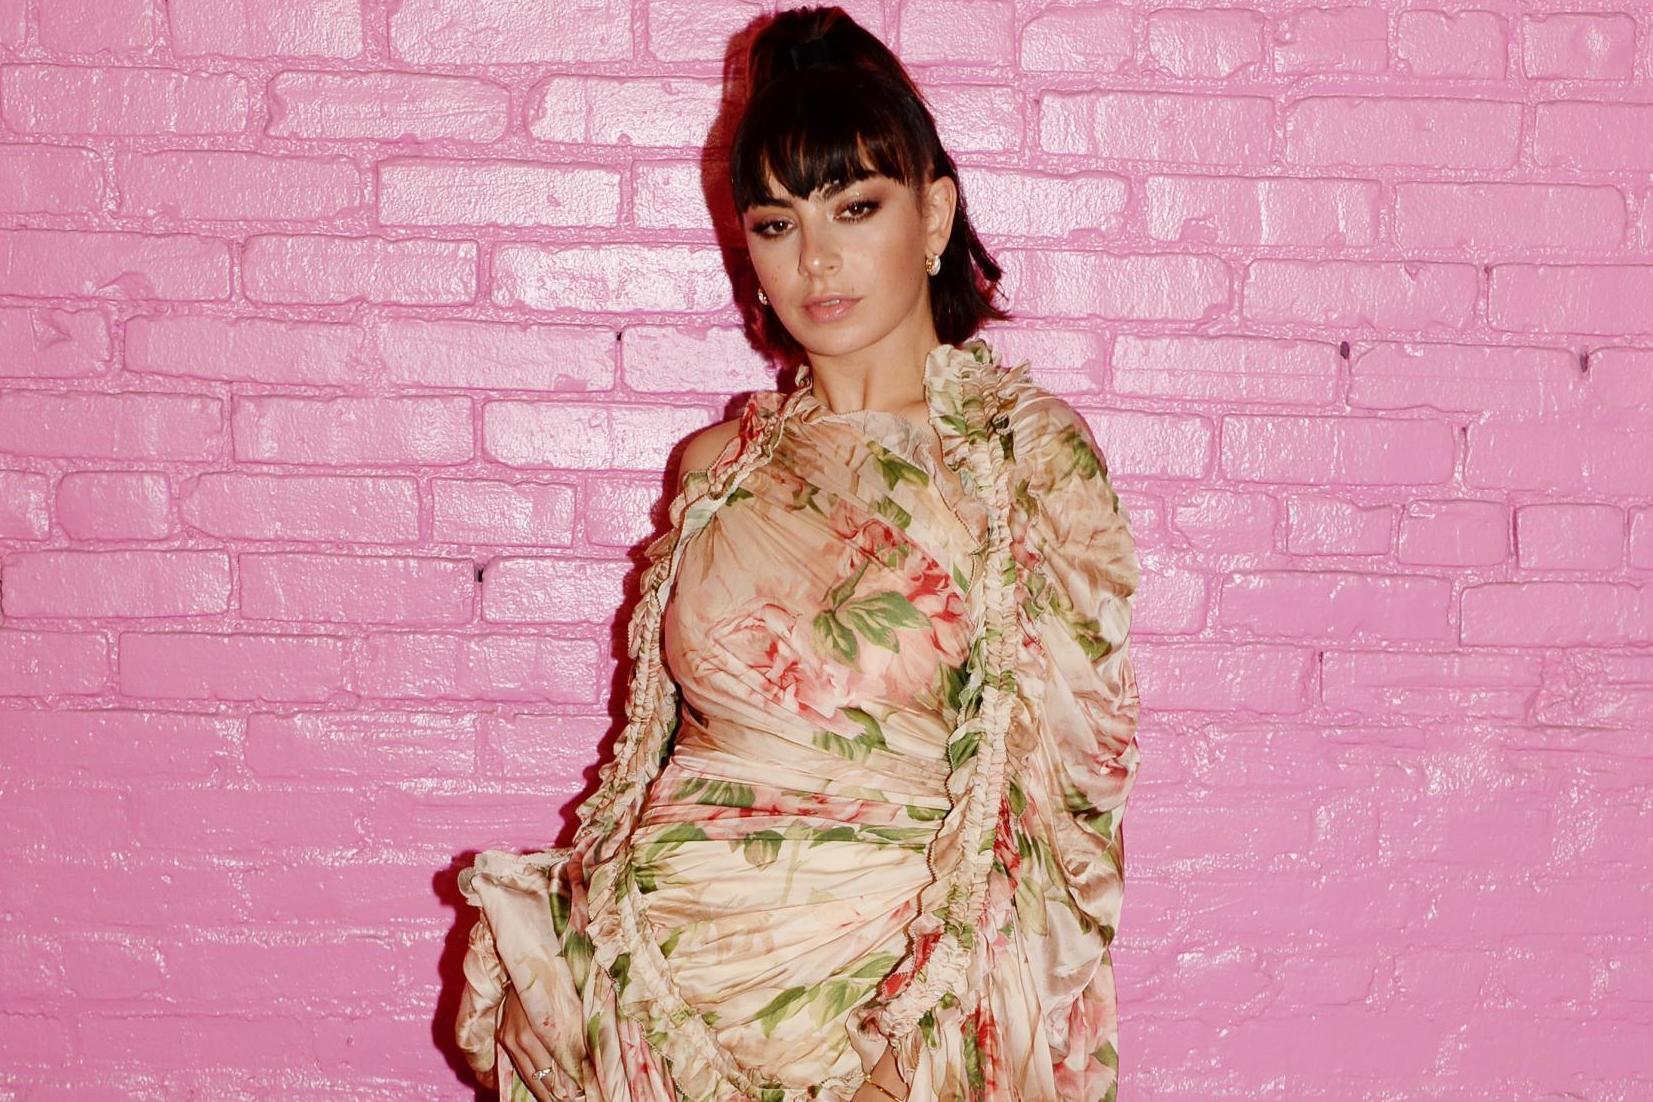 Charli XCX defends fans who asked her to sign dead mum's ashes and a douche, The Independent